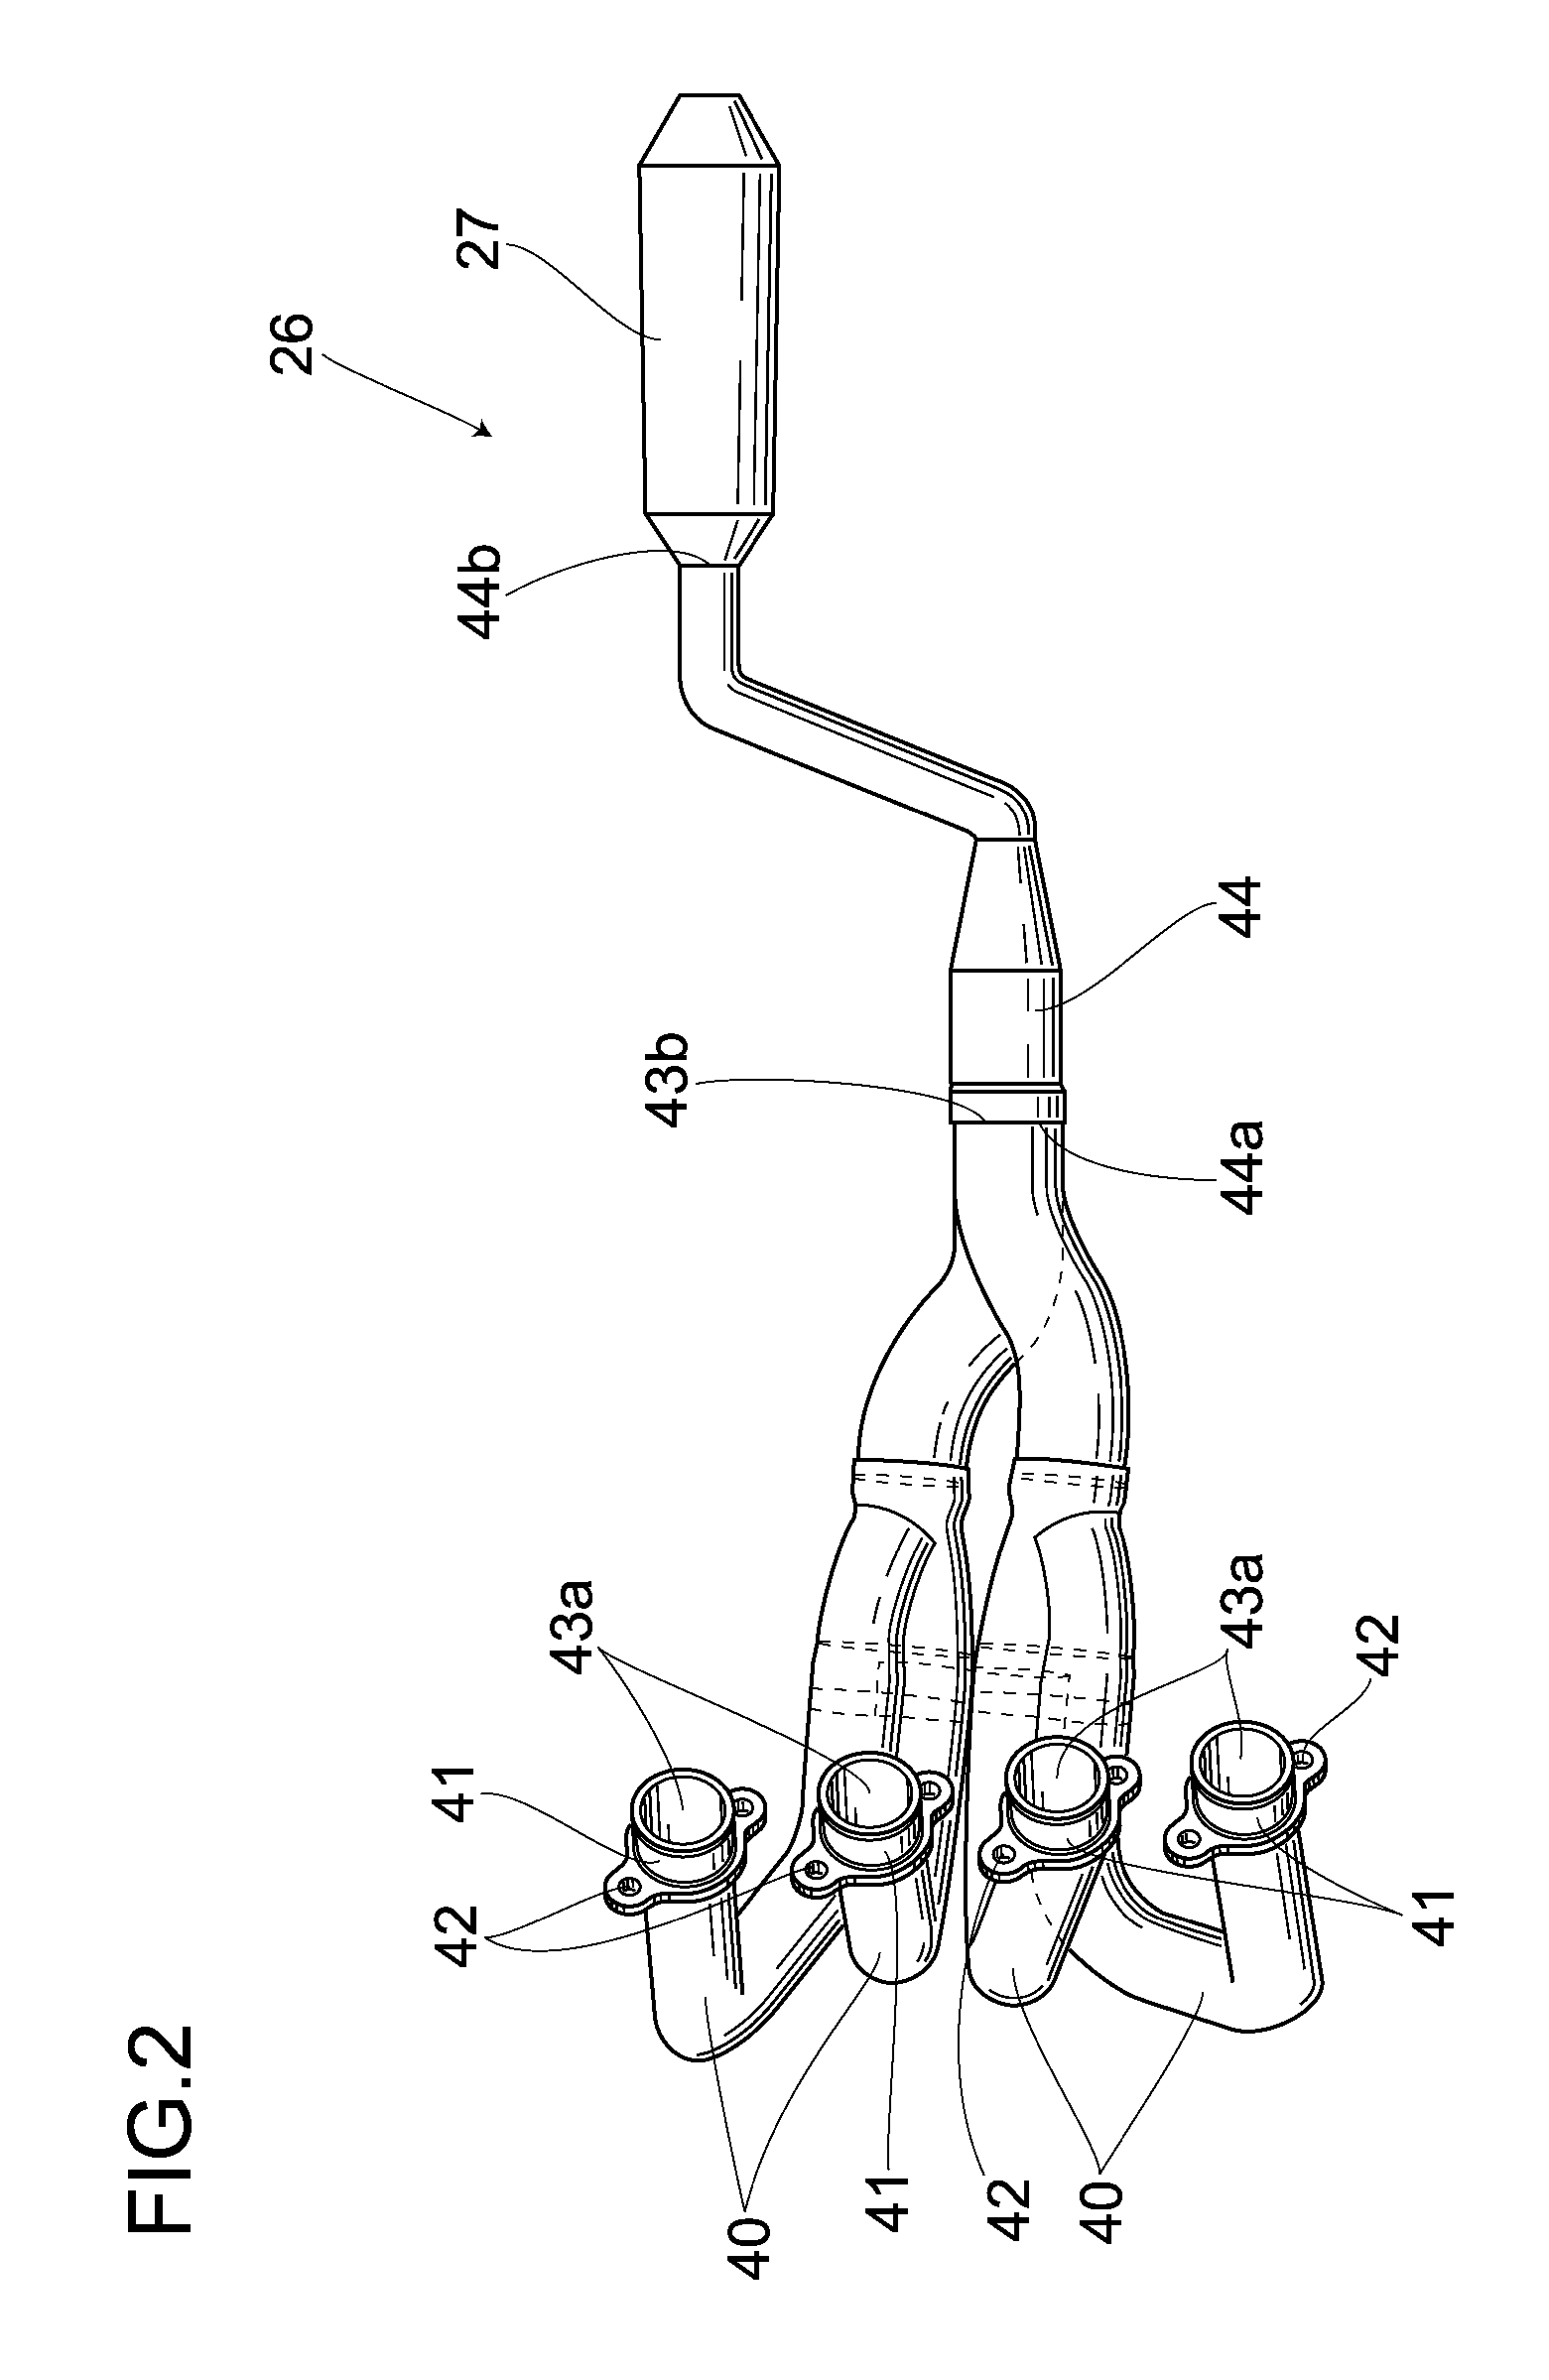 Method and apparatus for manufacturing an exhaust pipe assembly